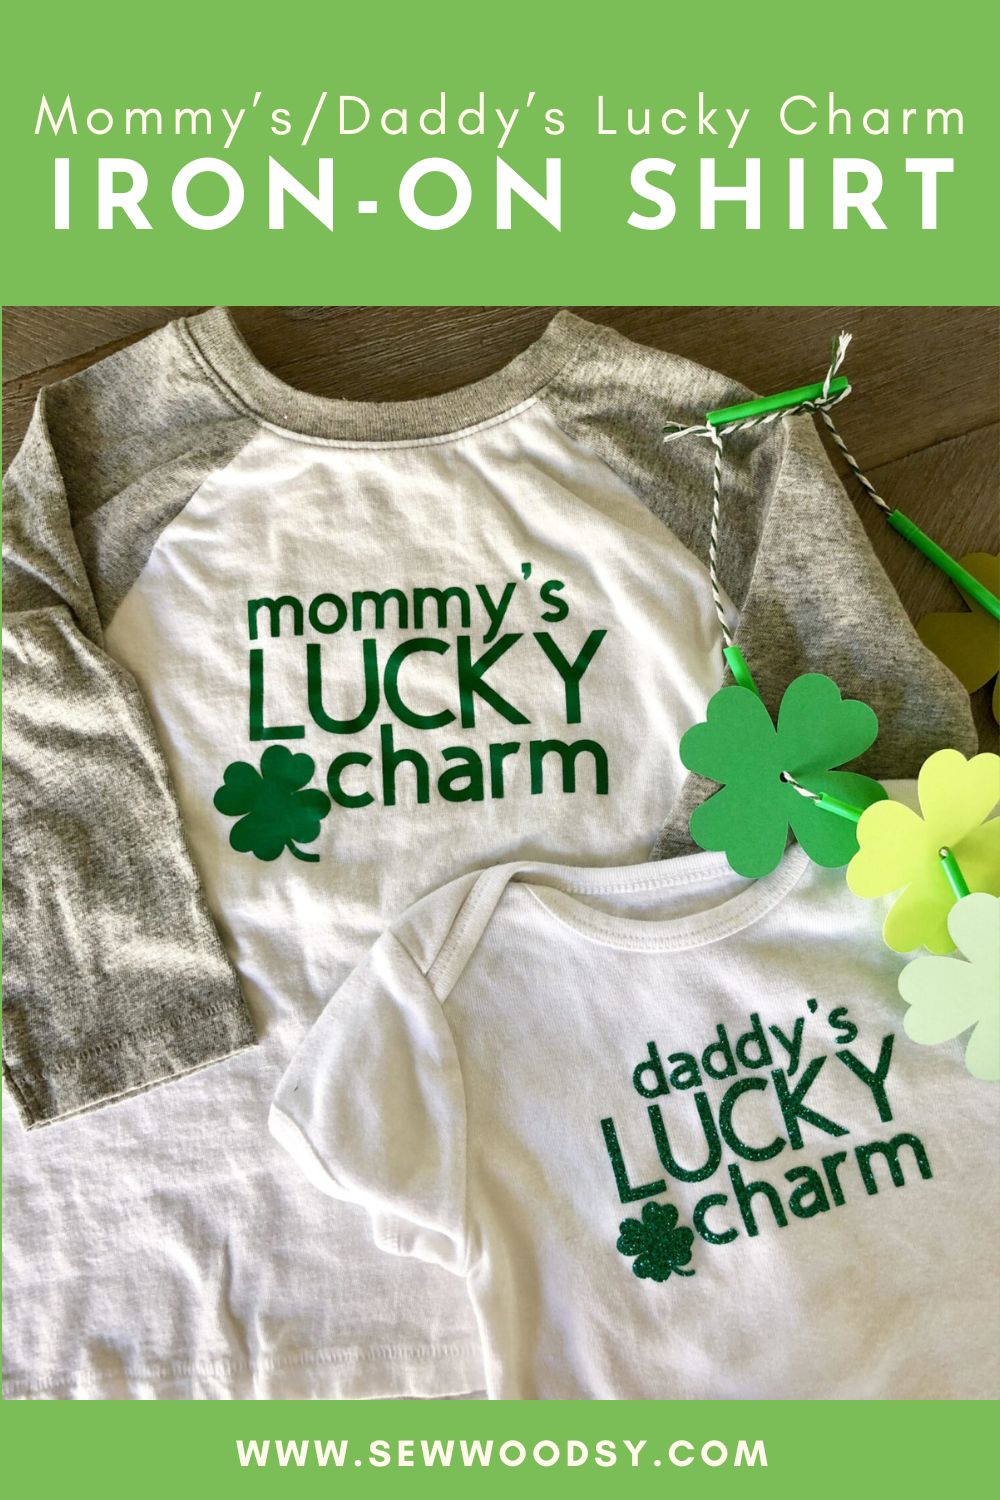 Two shirts that say lucky charm on them with text on image for Pinterest.